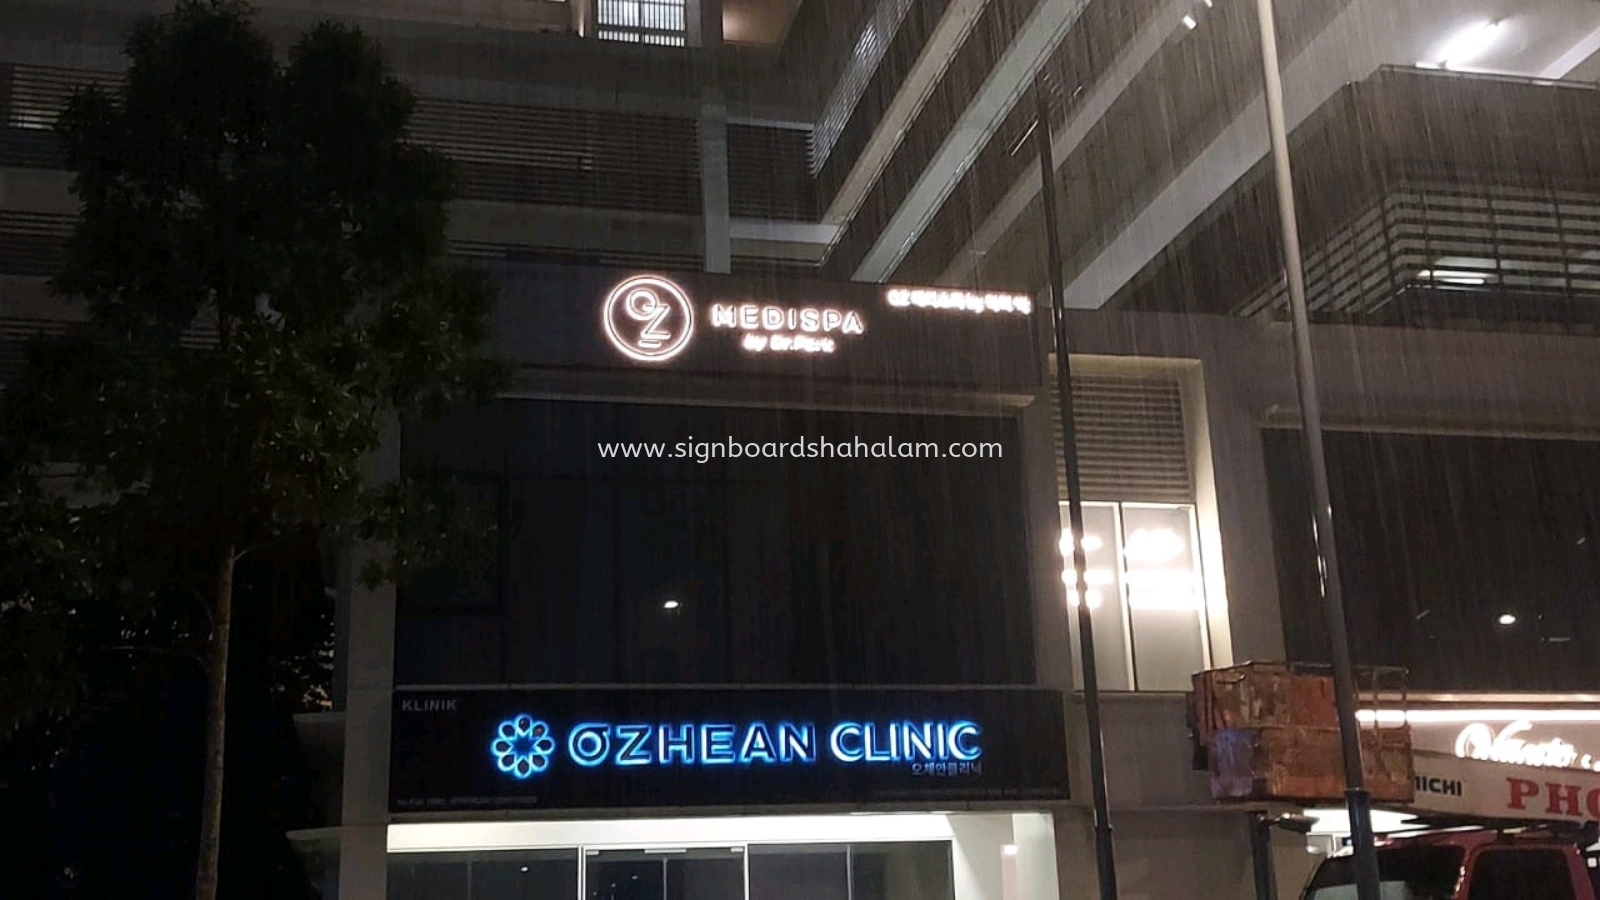 Ozhean Clinic - 3D LED Box Up Stainless Steel Rose Gold 